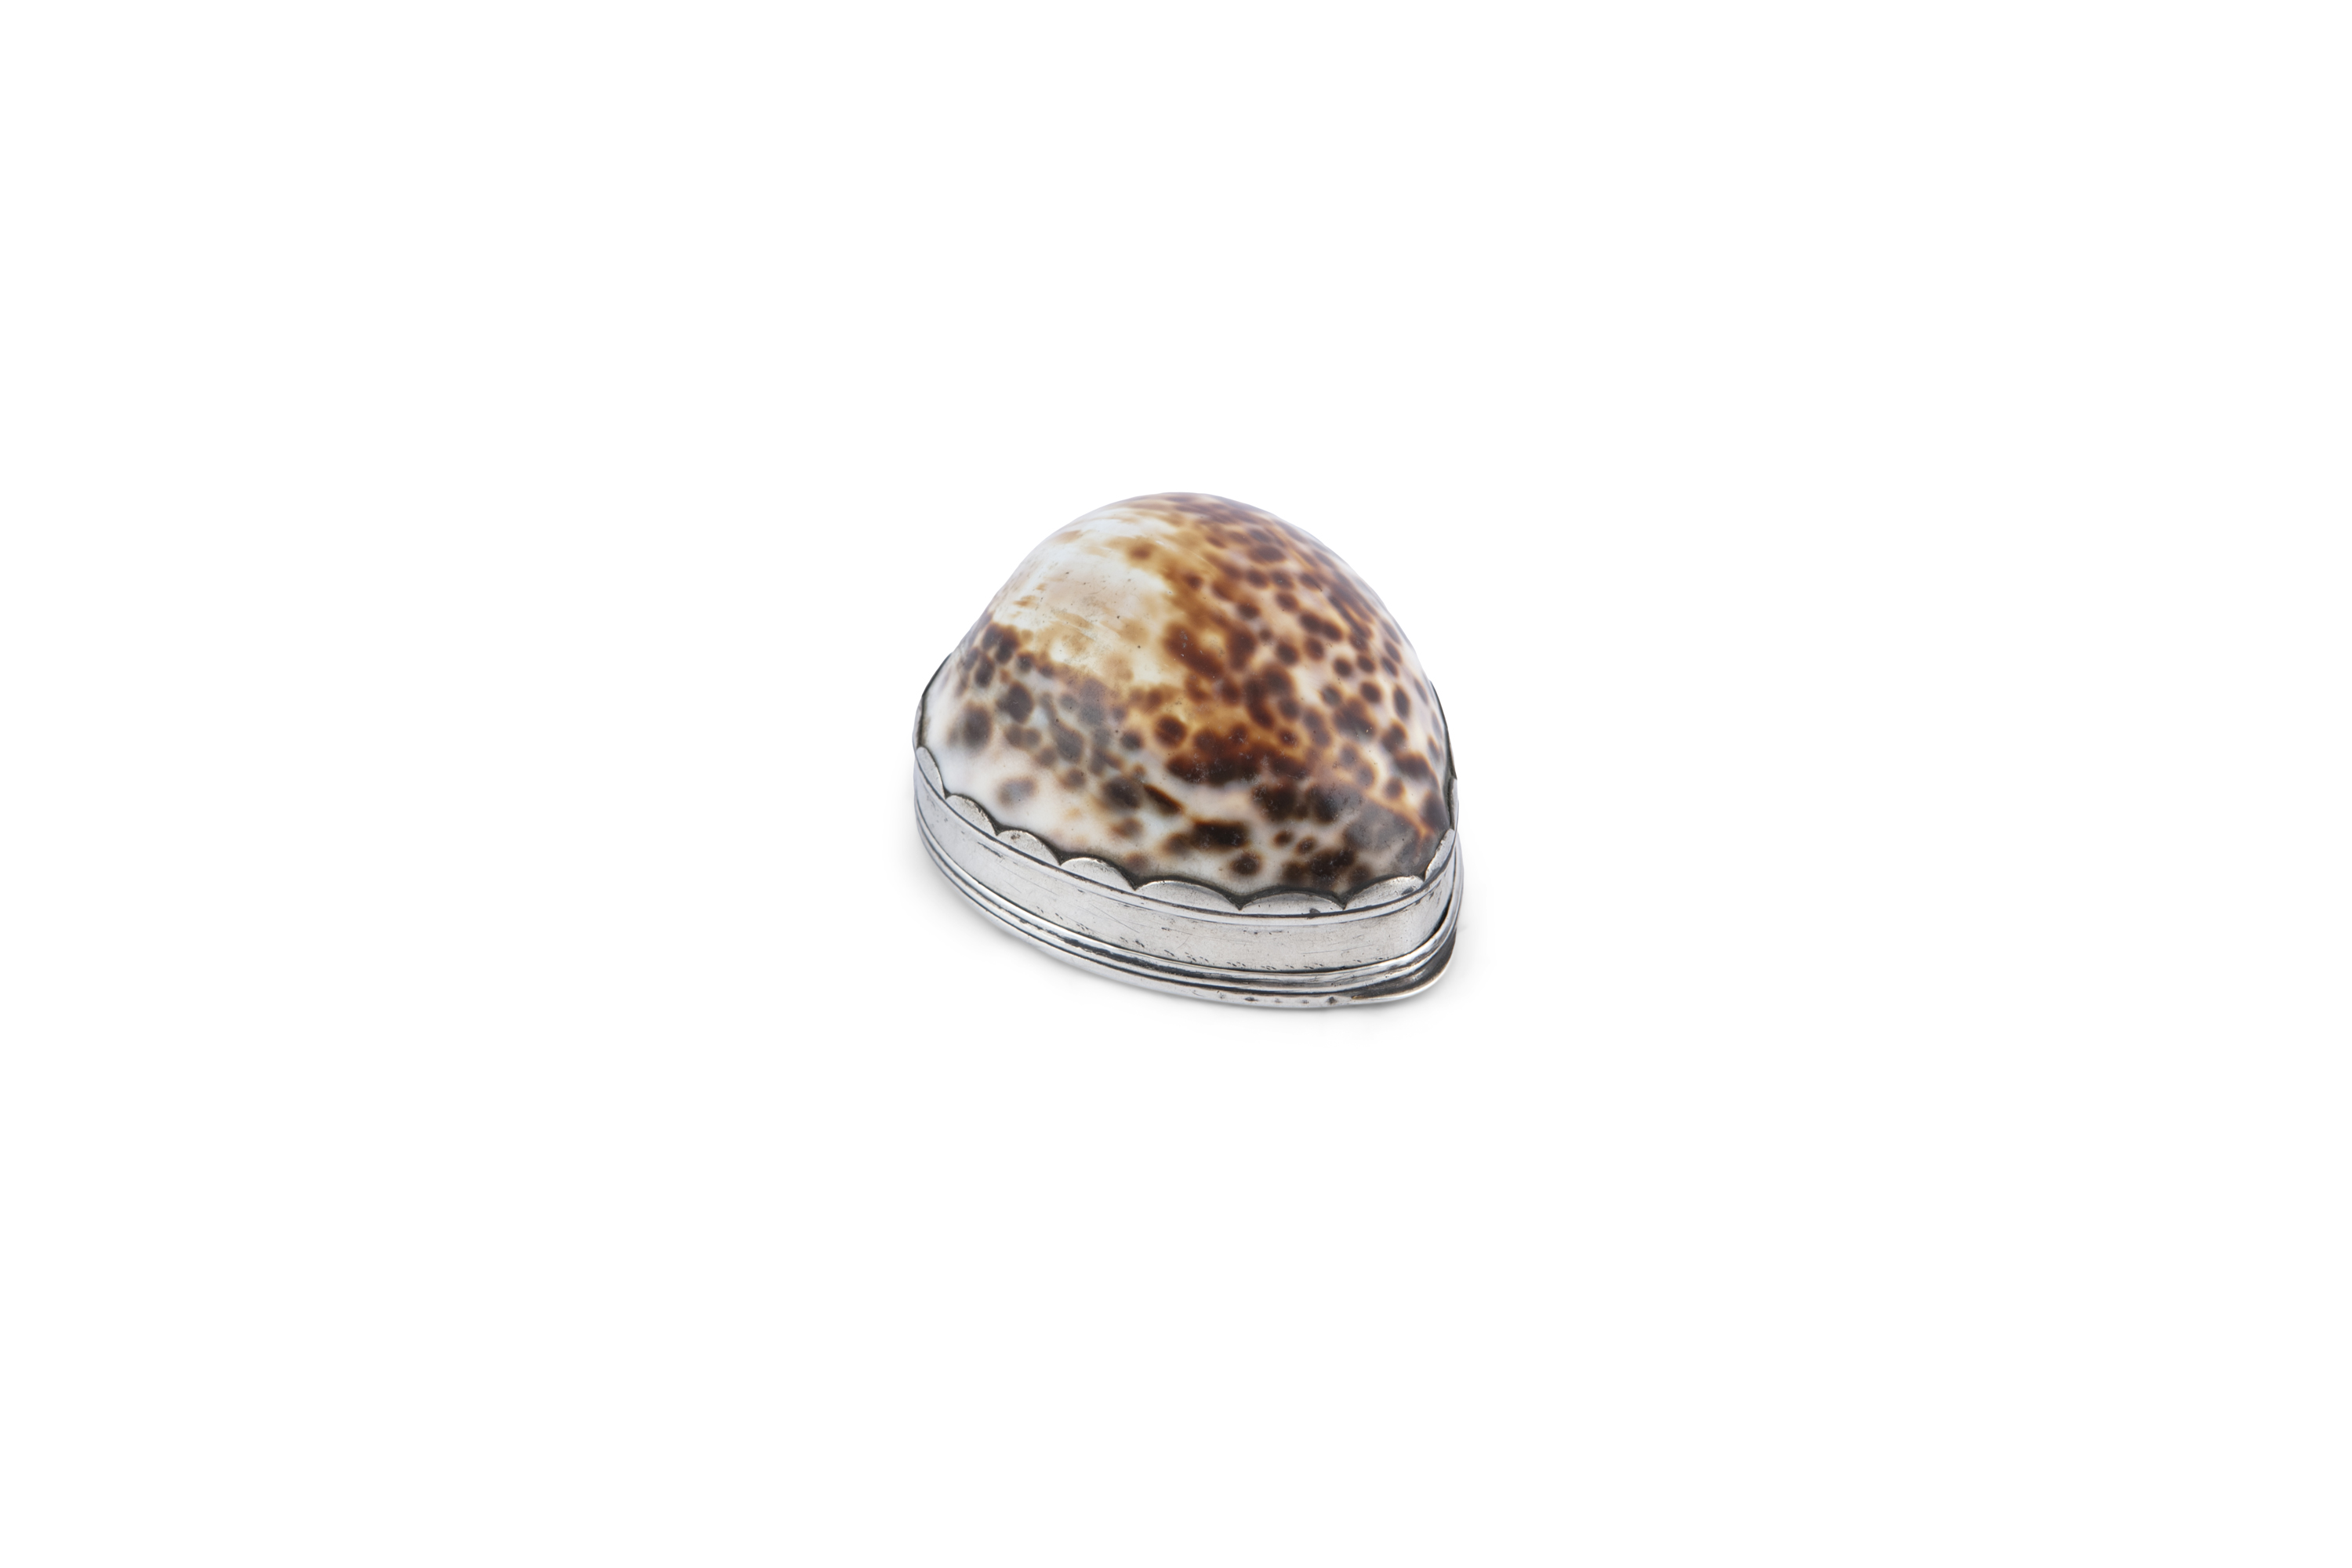 A GEORGE III SILVER MOUNTED COWRIE SHELL, c.1800, with hinged tortoiseshell cover, unmarked. 7.5cm